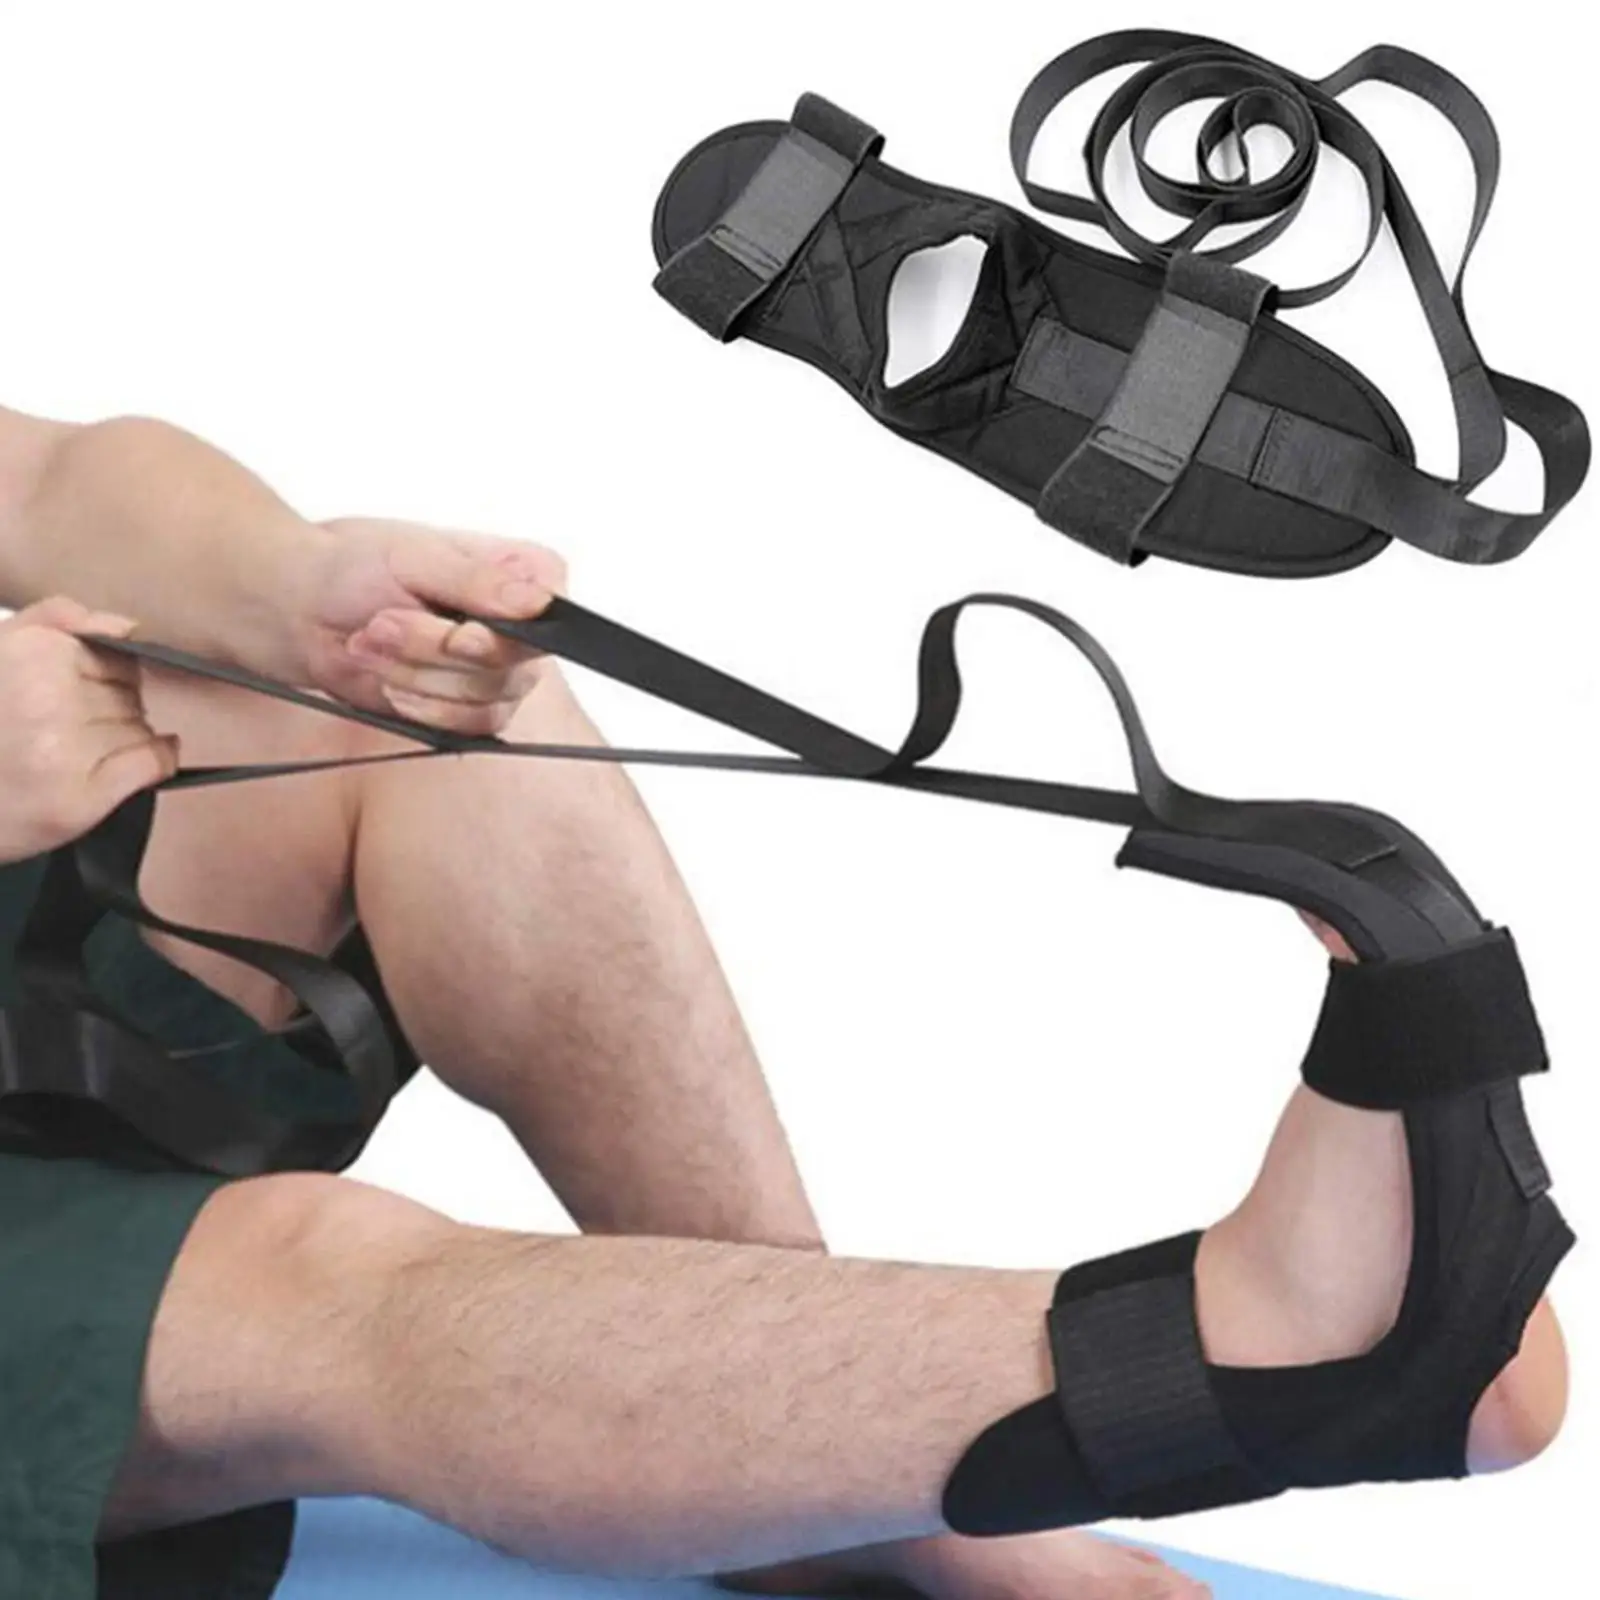 Multi-Loop 6 Loops Stretch Strap & Foot Stretcher Set Stretching for Pilates